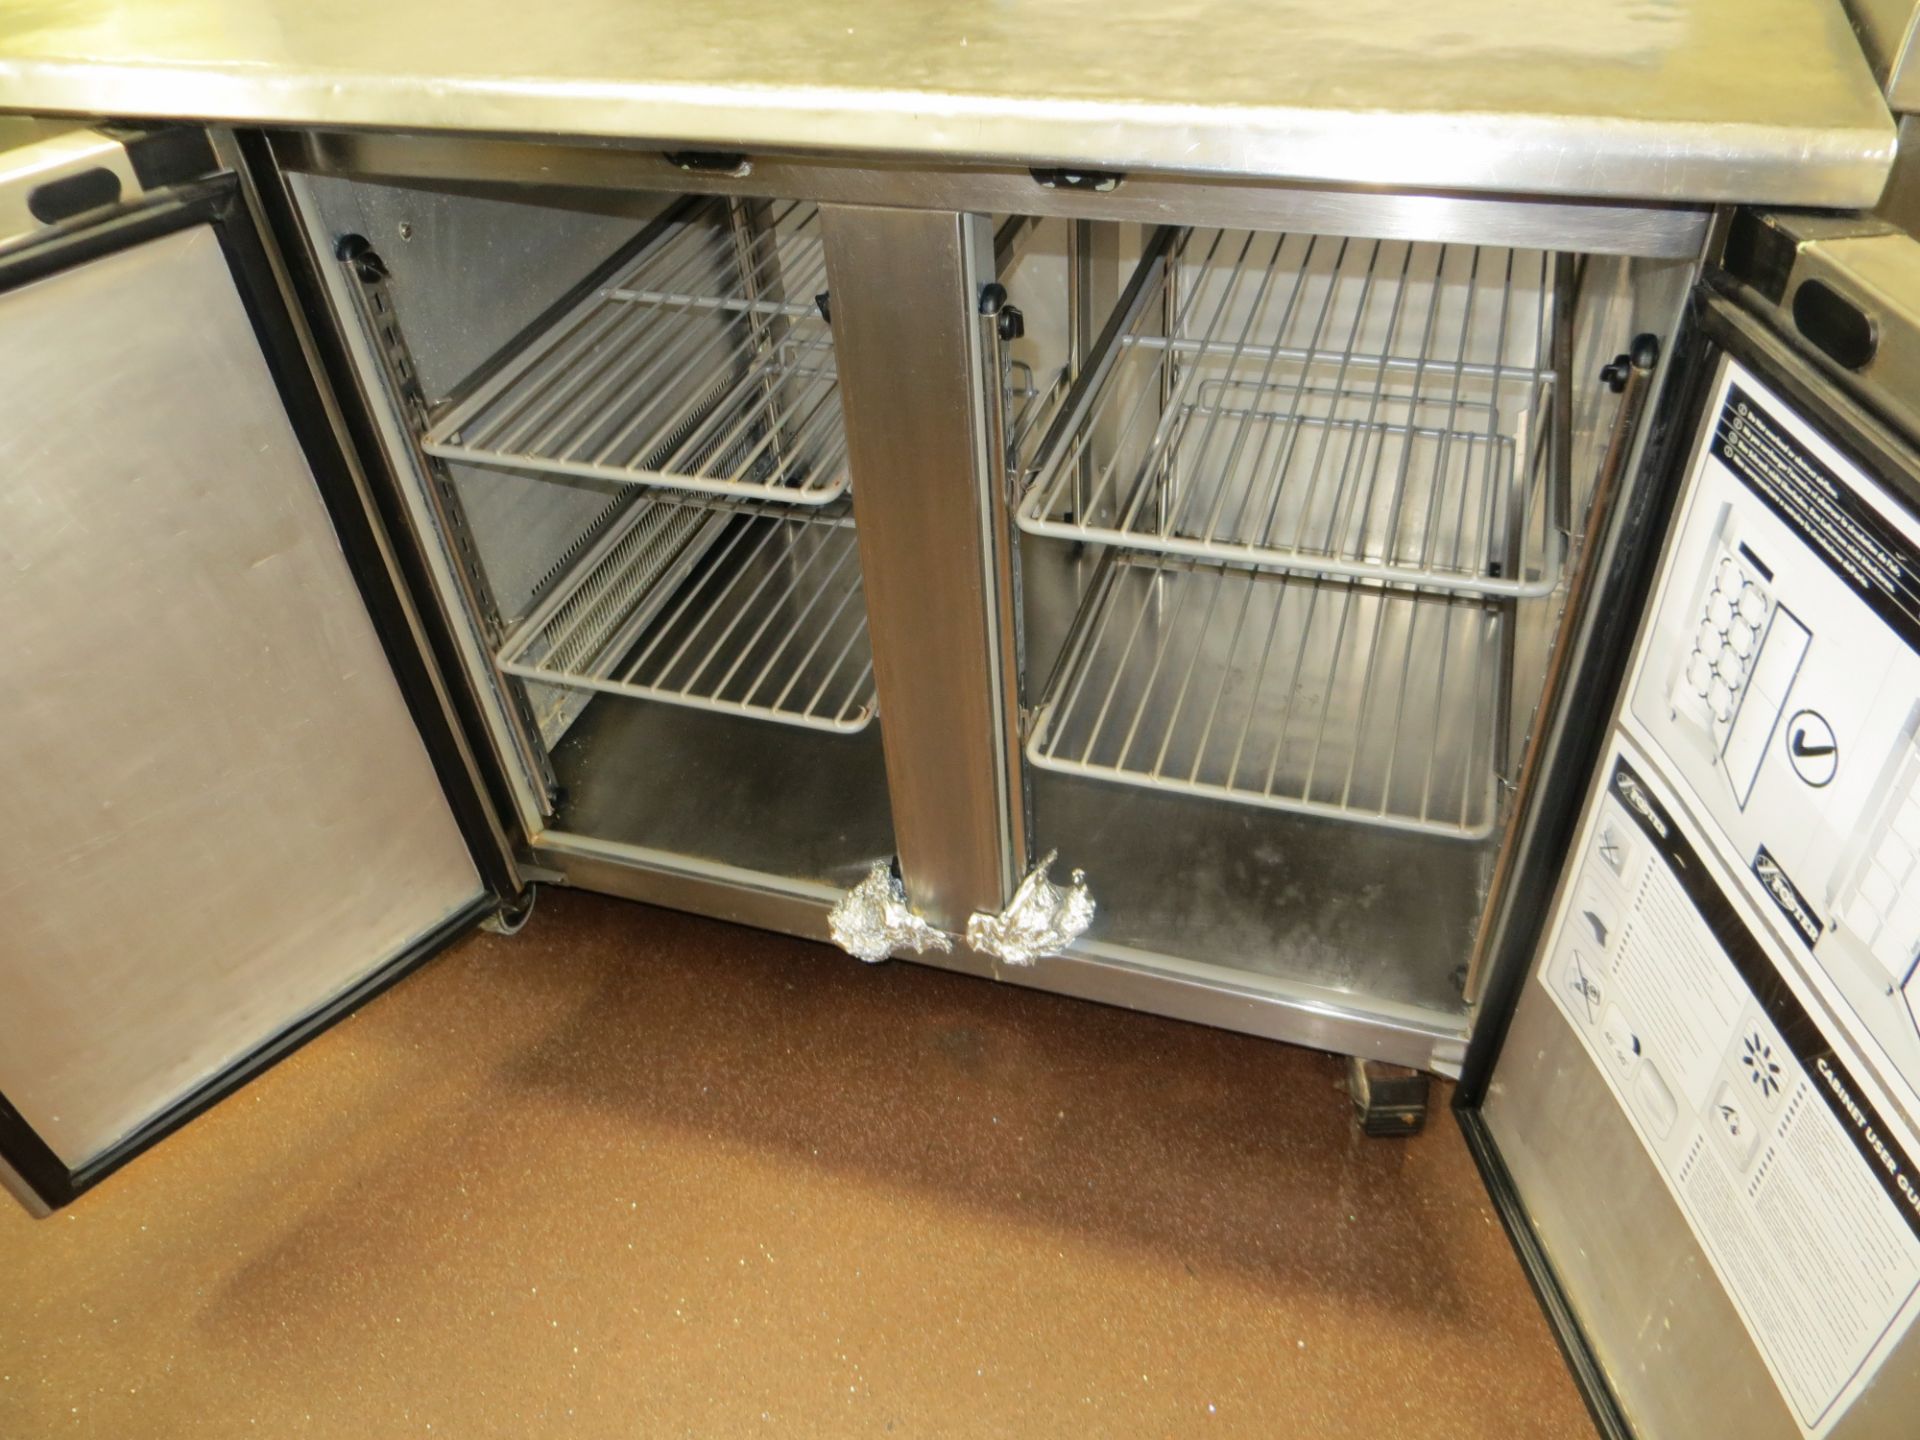 Foster Gastronorm Supra +1°/+4° two door mobile stainless steel under counter chiller - Image 2 of 2